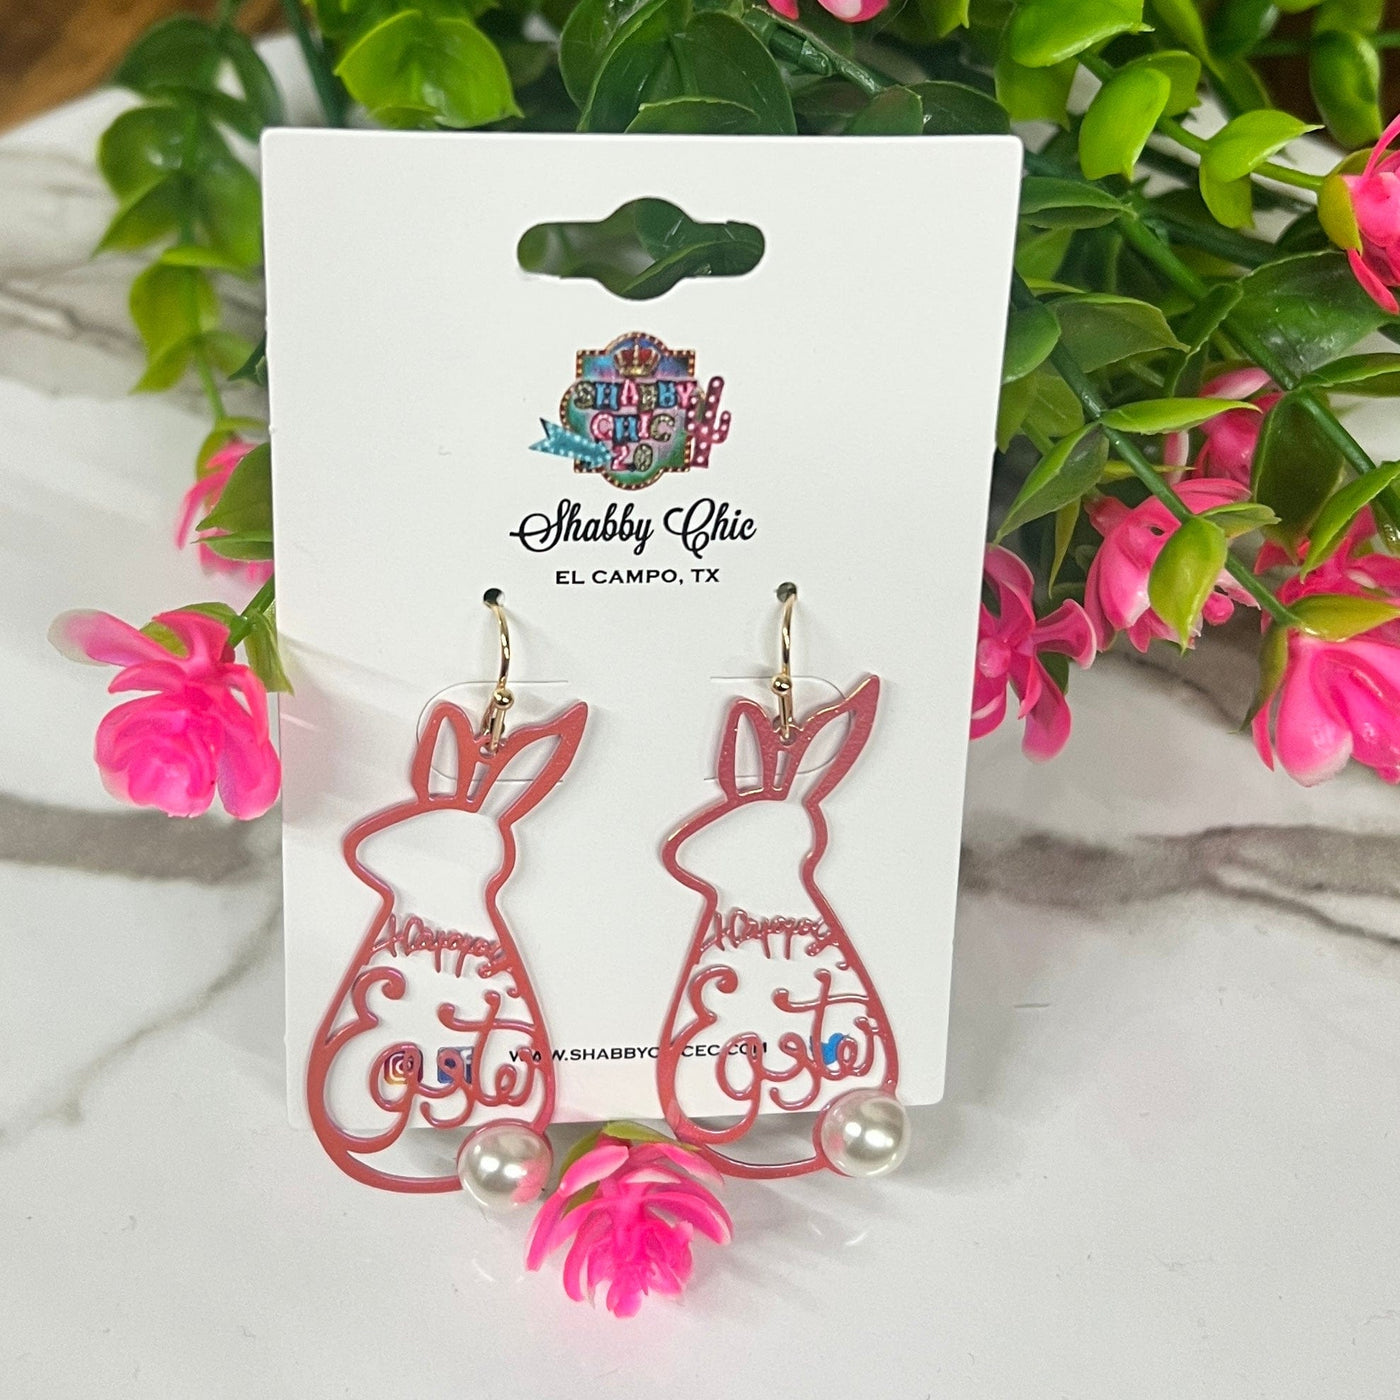 Happy Easter Bunny Earrings - Pink Shabby Chic Boutique and Tanning Salon